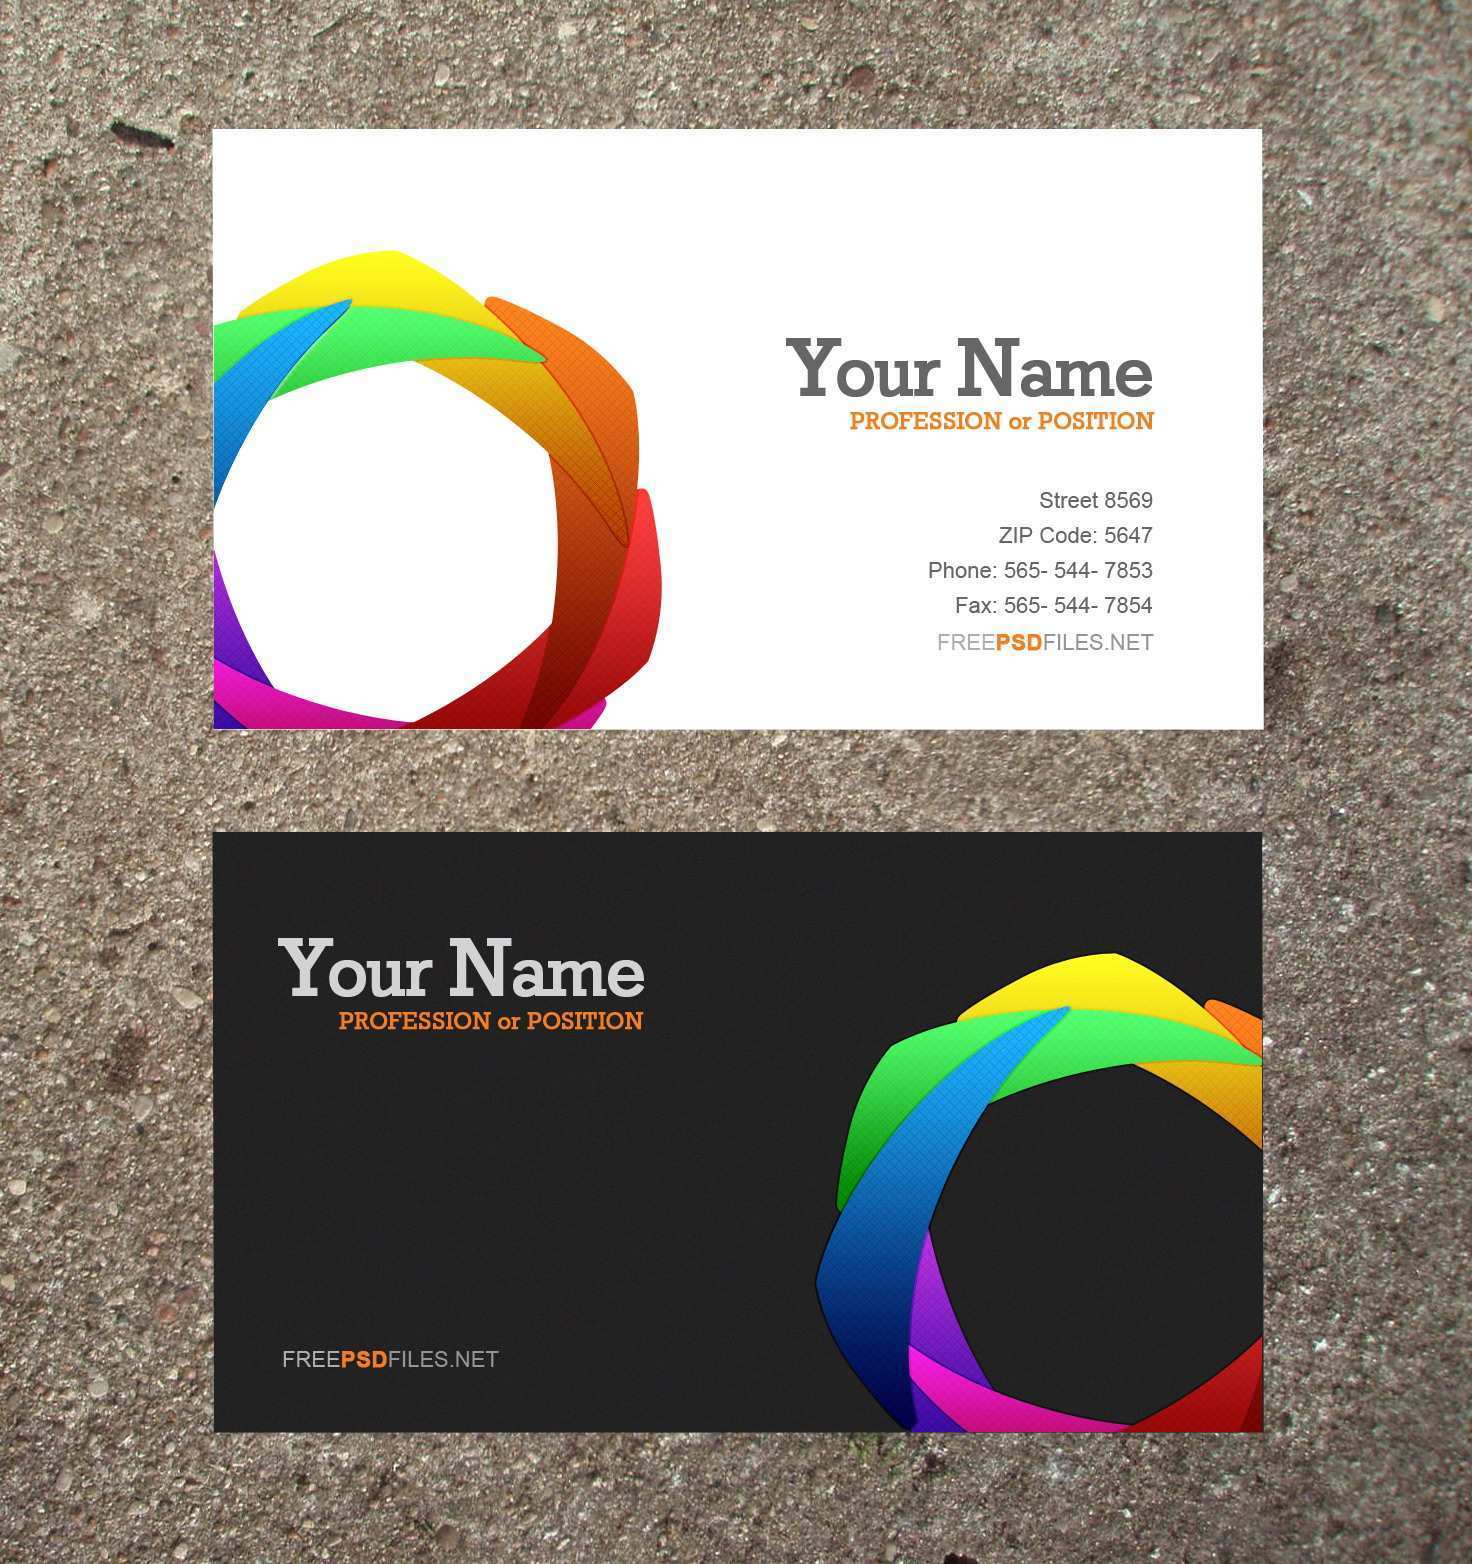 calling-card-template-free-online-cards-design-templates